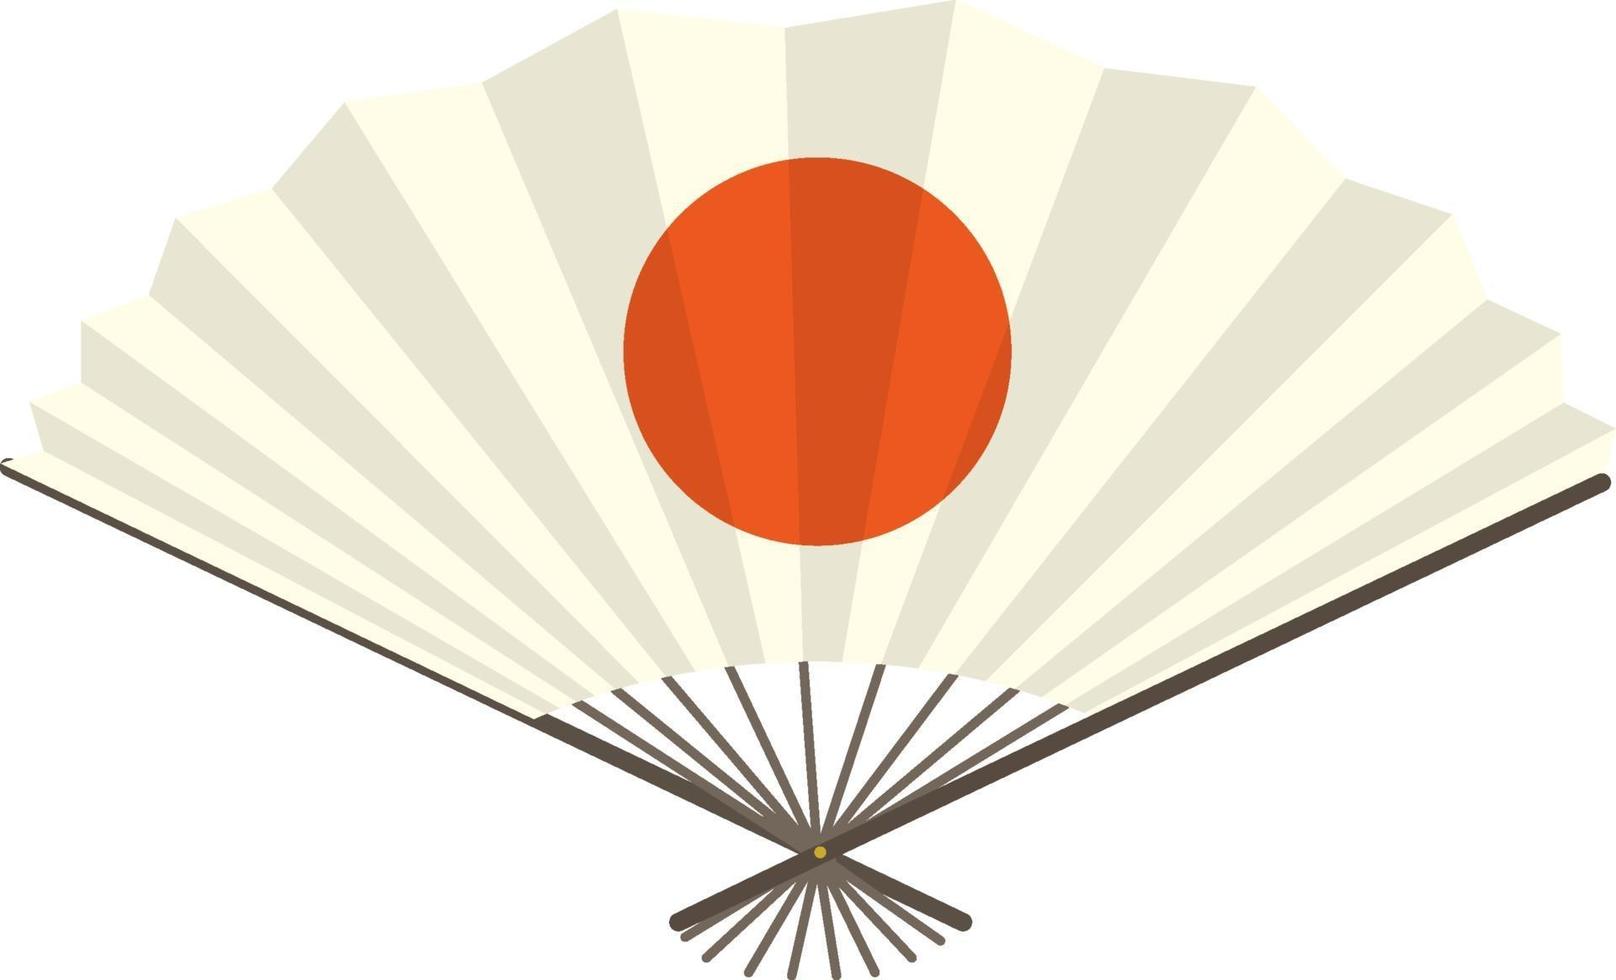 Japanese folding fan or hand fan with the red sun printed vector